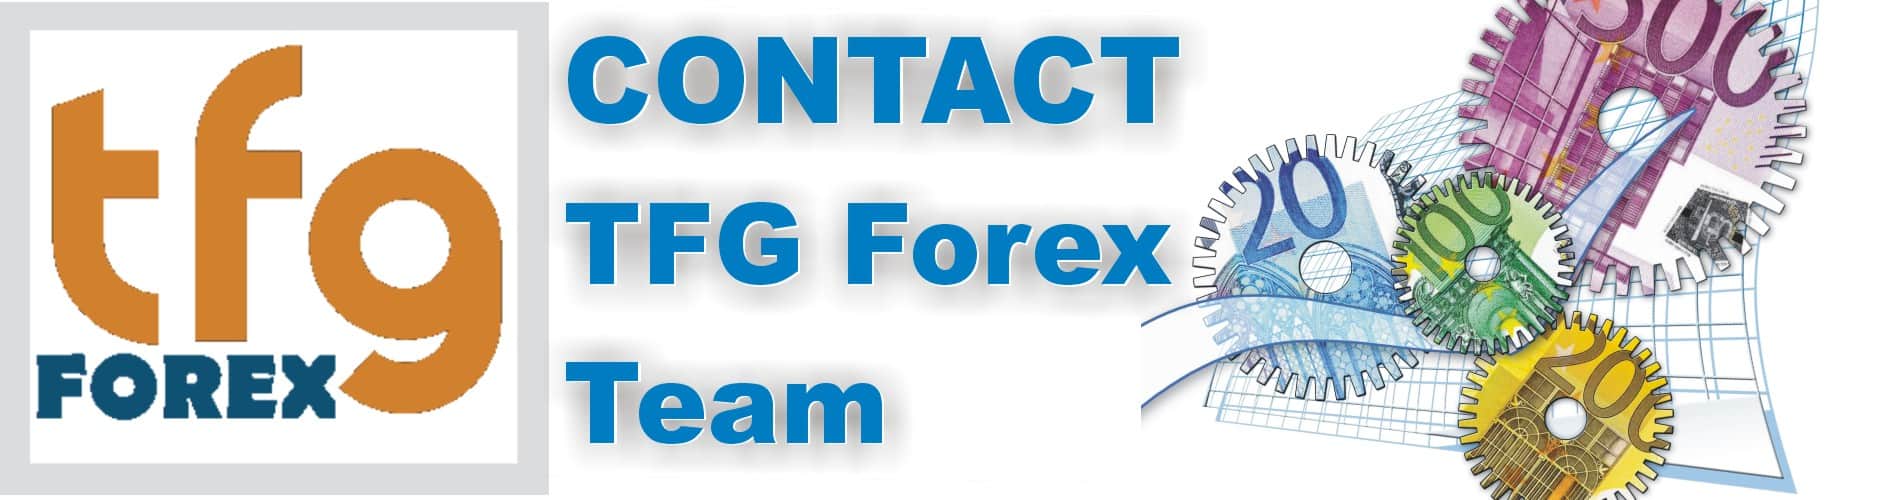 Contact-TFG Forex